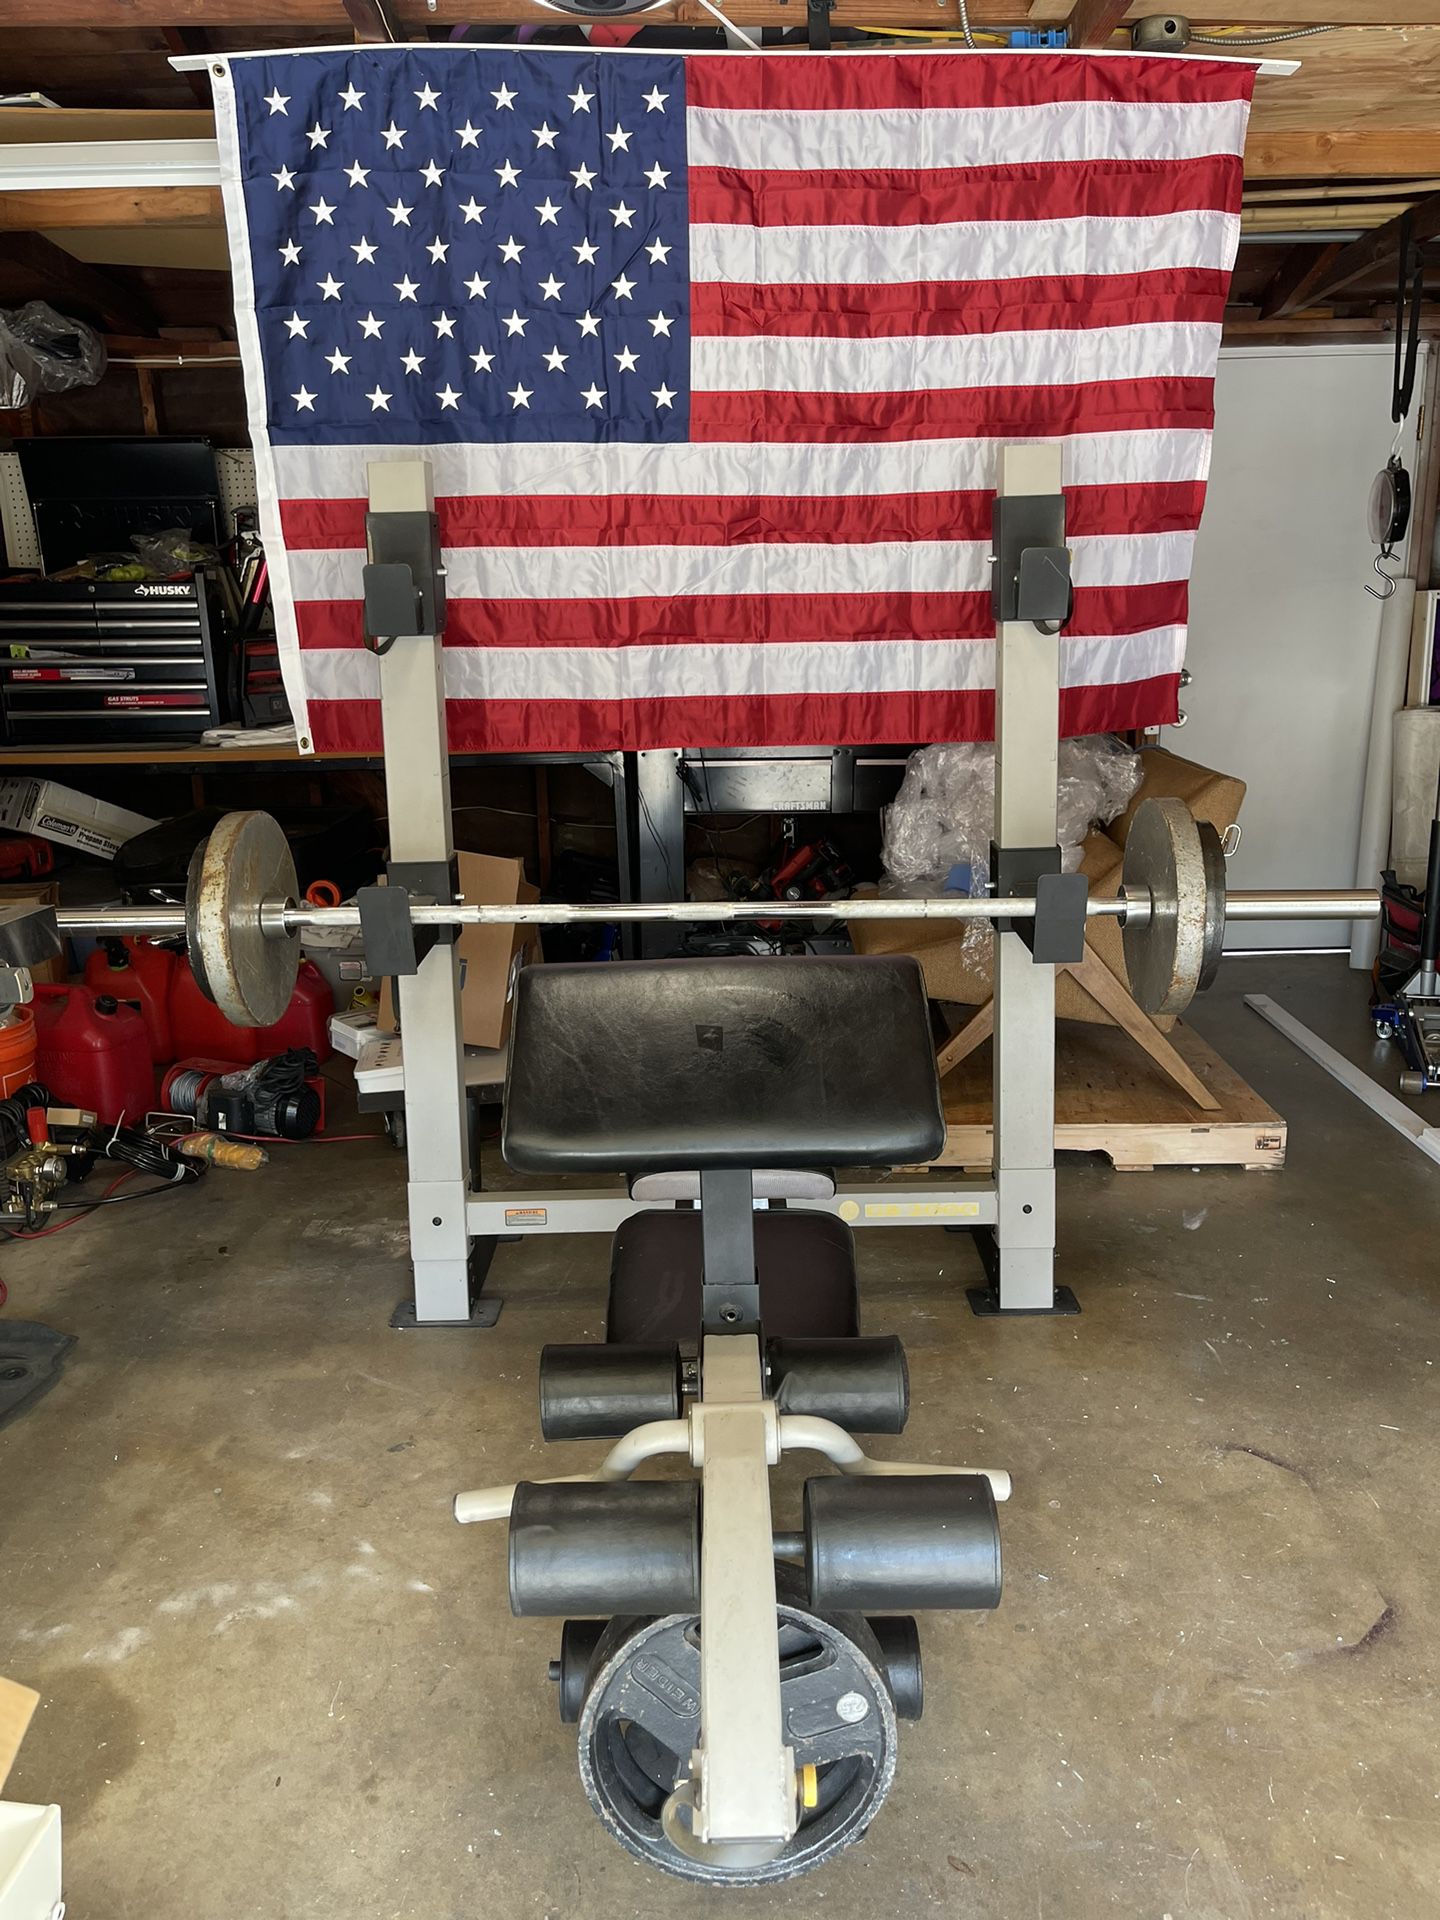 GOLDS GYM OLYMPIC WEIGHT BENCH with WEIGHTS 